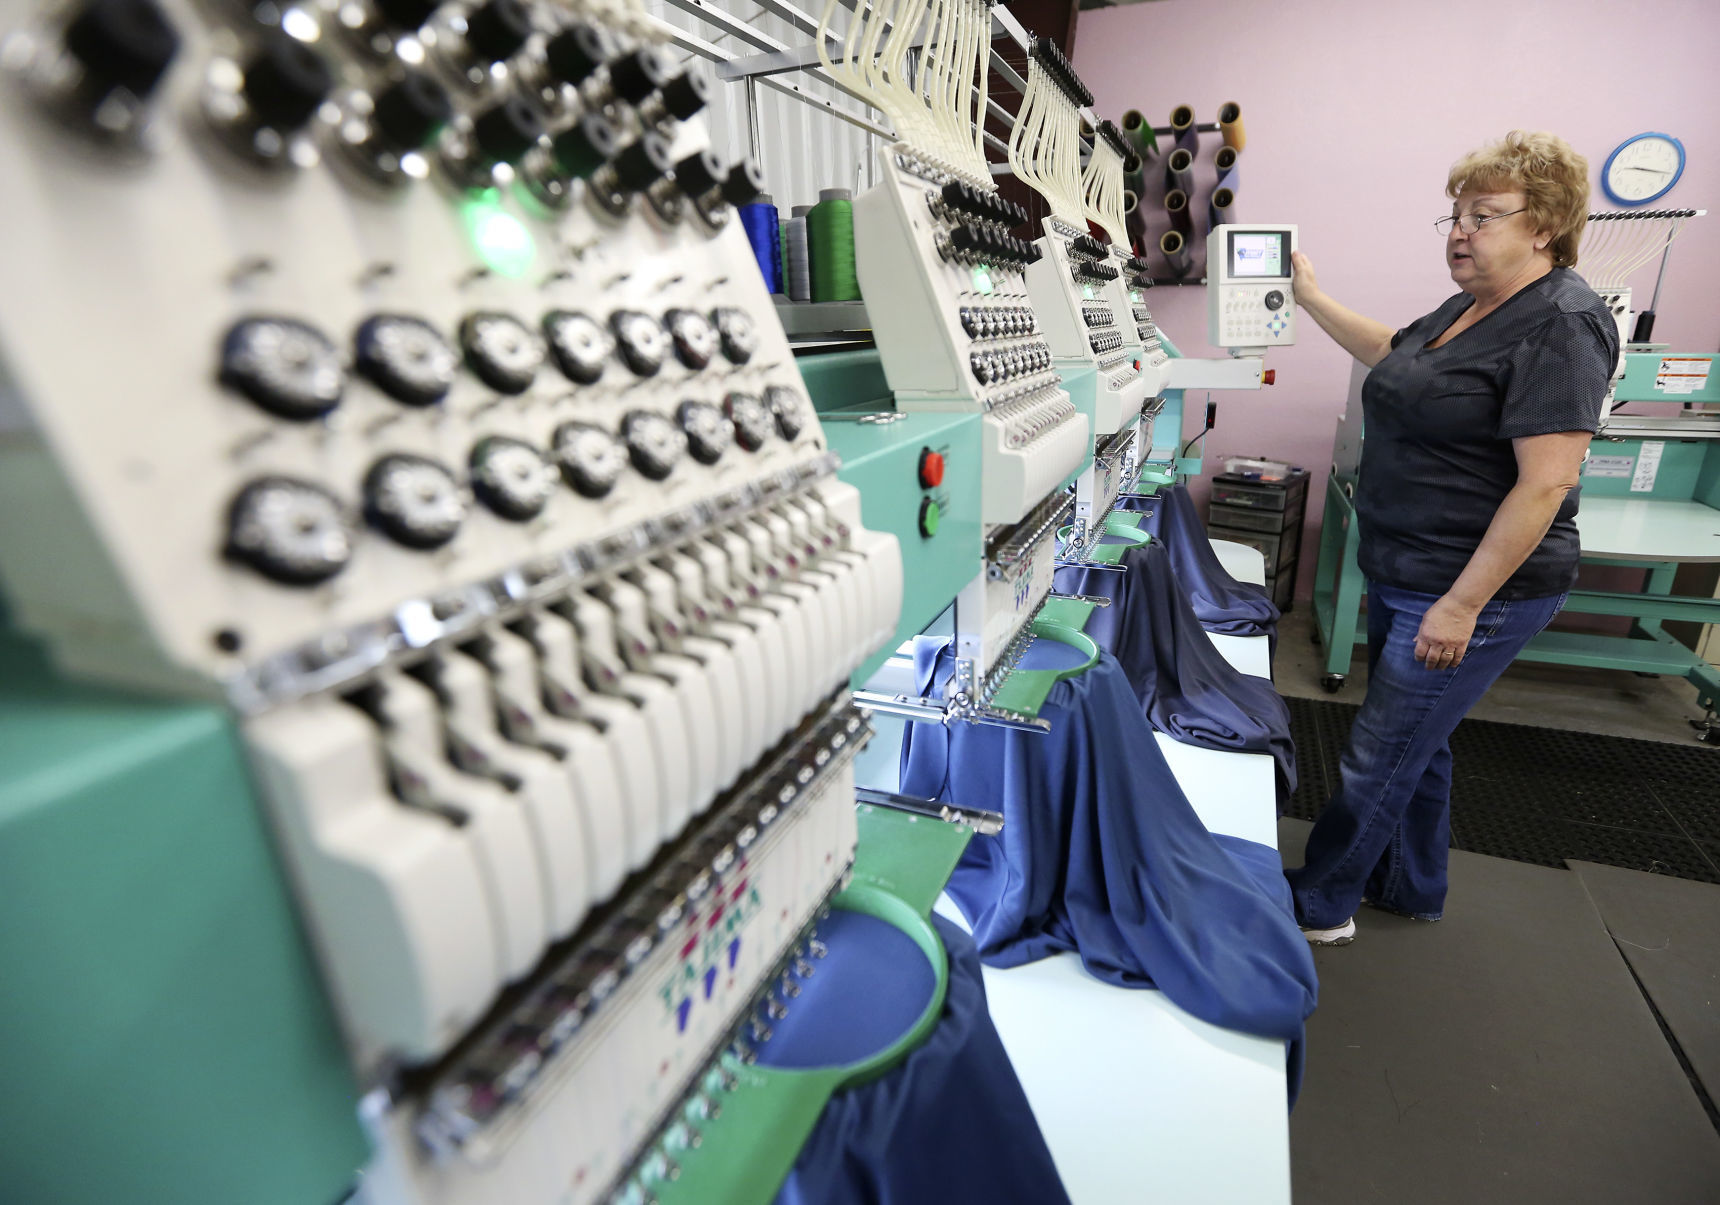 Co-owner Ginnie Gushulak operates an embroidery machine at Buncombe in Hazel Green, Wis. She and her husband, Mike, opened it in 1997 and it has since expanded to a larger facility. It began as a side project but grew into a full-time job.    PHOTO CREDIT: NICKI KOHL